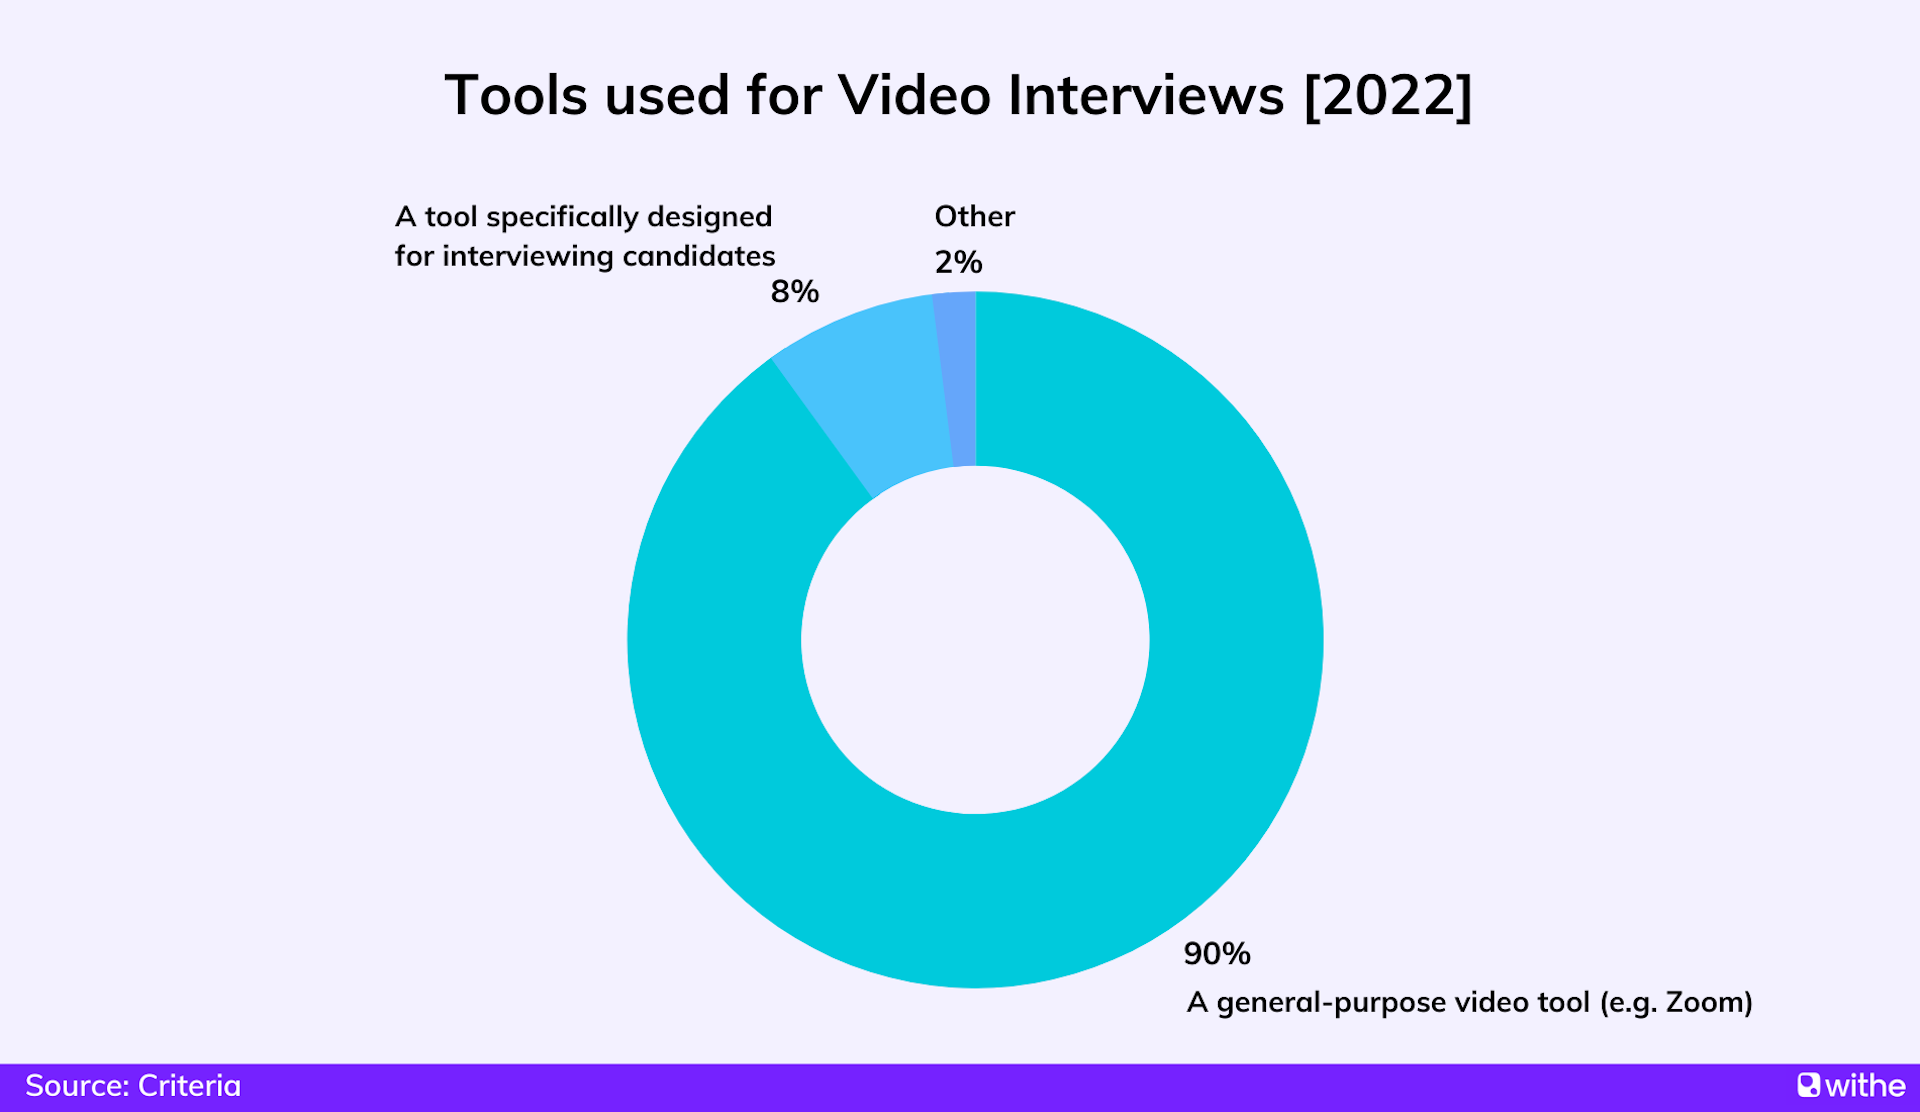 Job interview statistics - tools used for video interviews in 2022